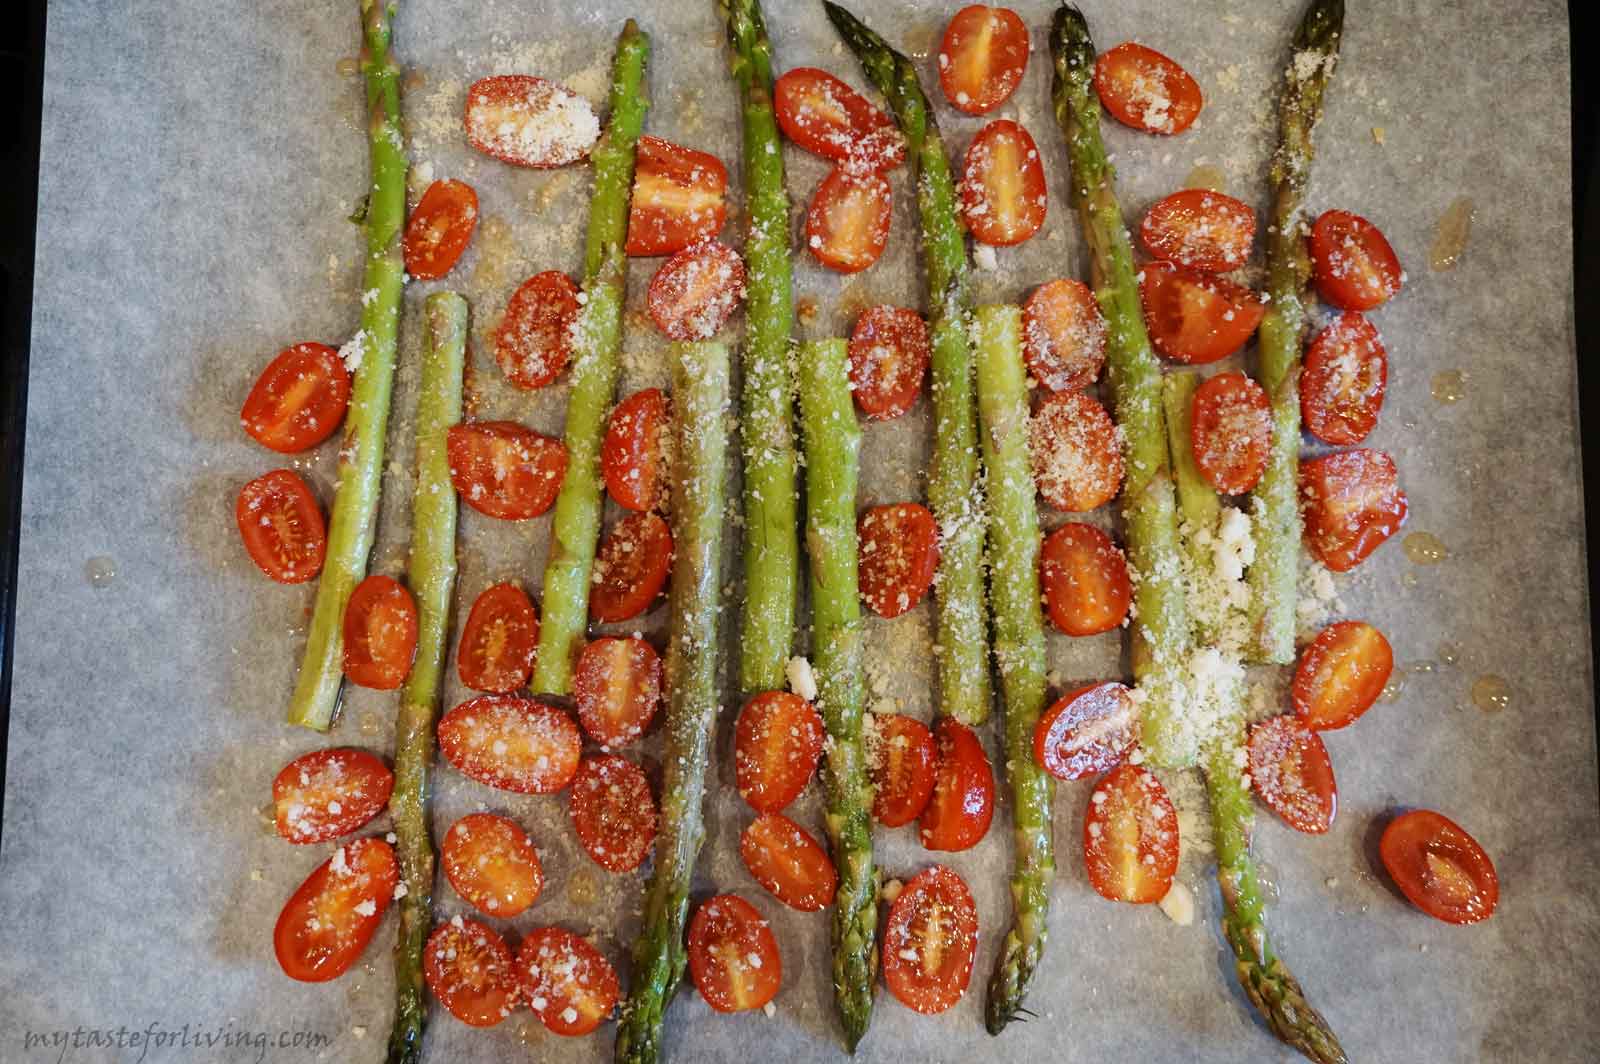 Baking asparagus is super easy and fast! I have been planning to share this recipe with you for a long time. You can serve the roasted asparagus with cherry tomatoes as a main dish or side dish. And if you grate cheese on top of them, you will lick your fingers. 